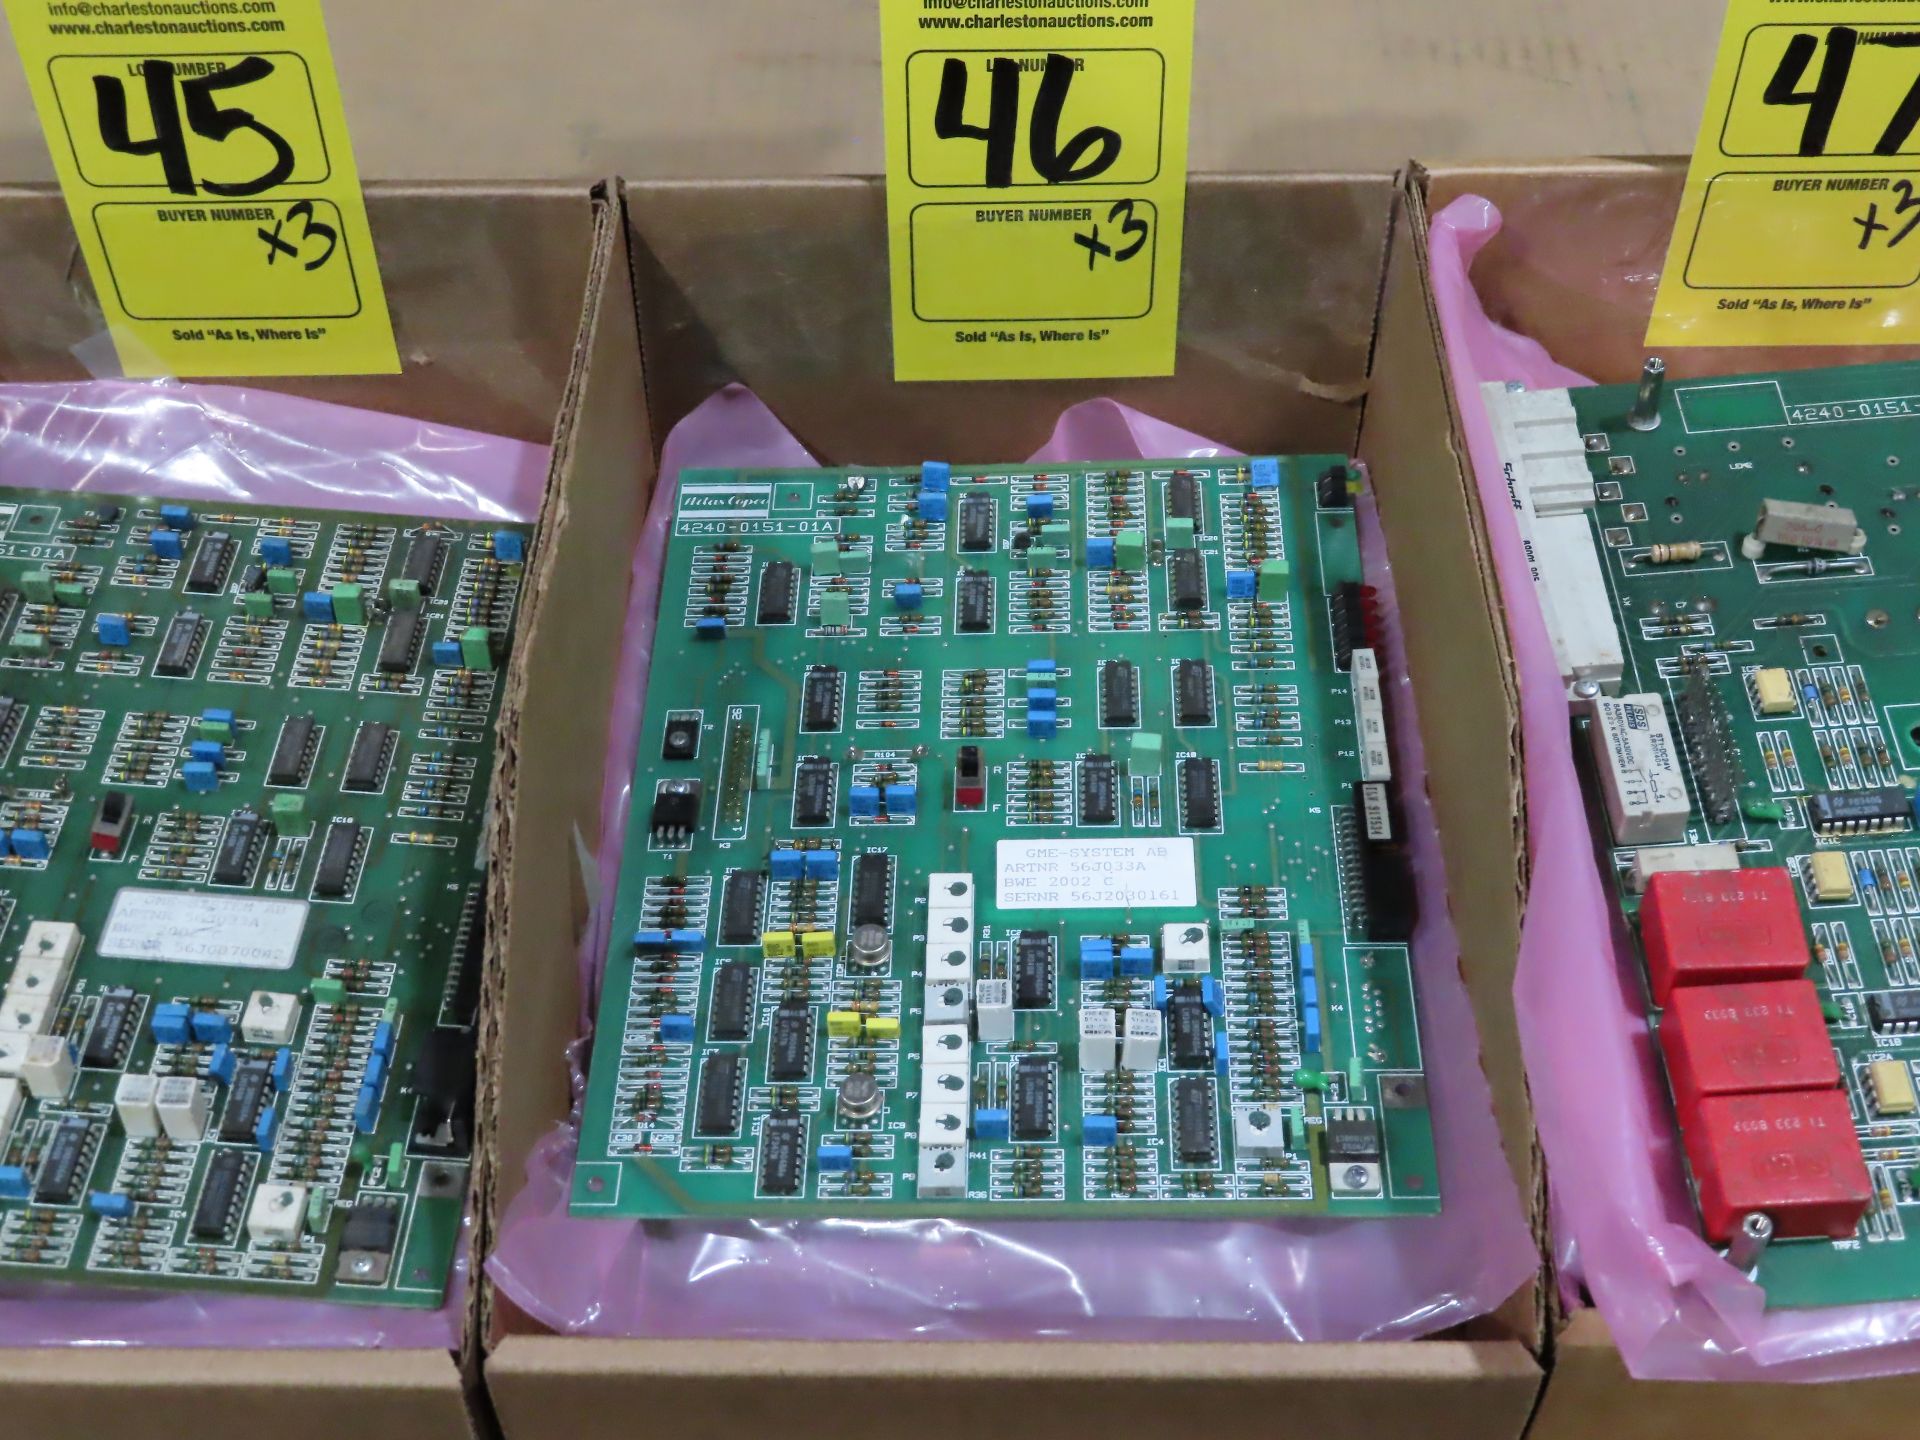 Qty 3 Altas Copco model 56J033A control boards, as always, with Brolyn LLC auctions, all lots can be